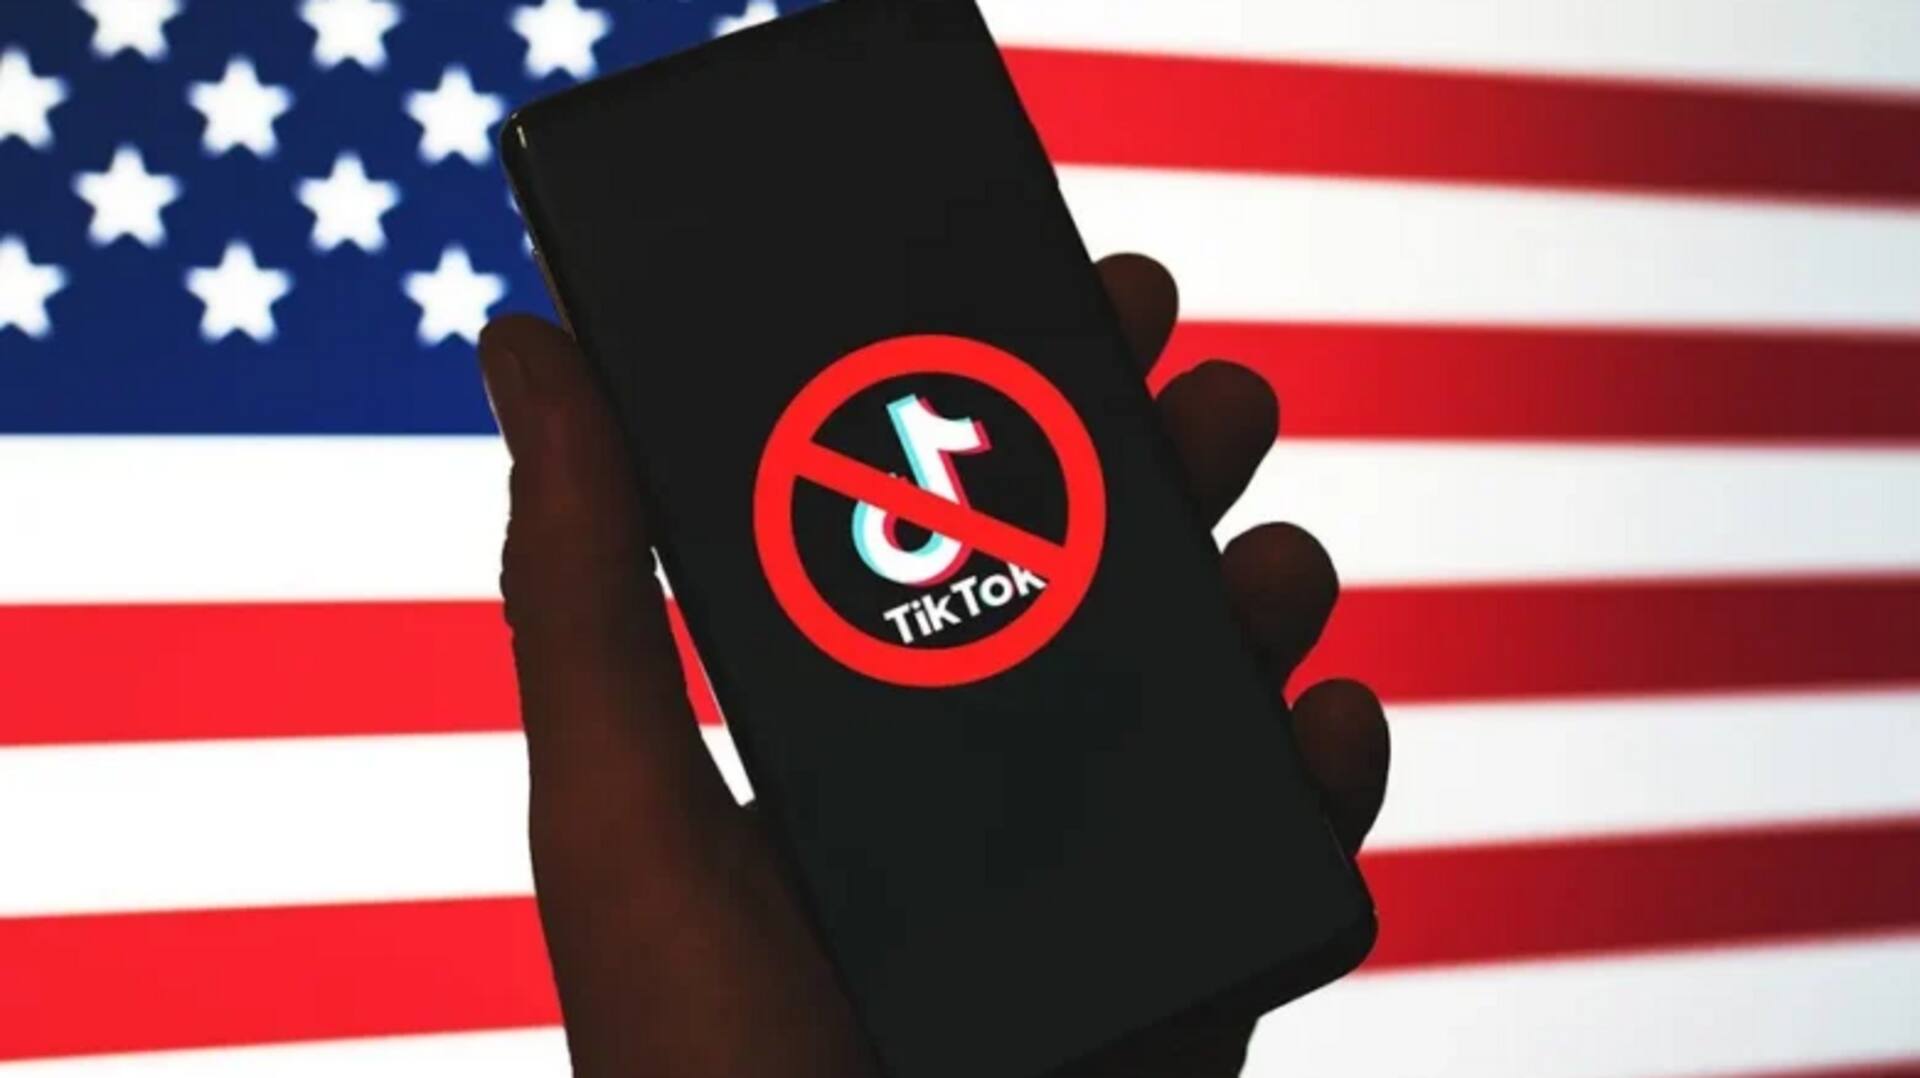 India's action on TikTok could influence US litigation: FCC chief